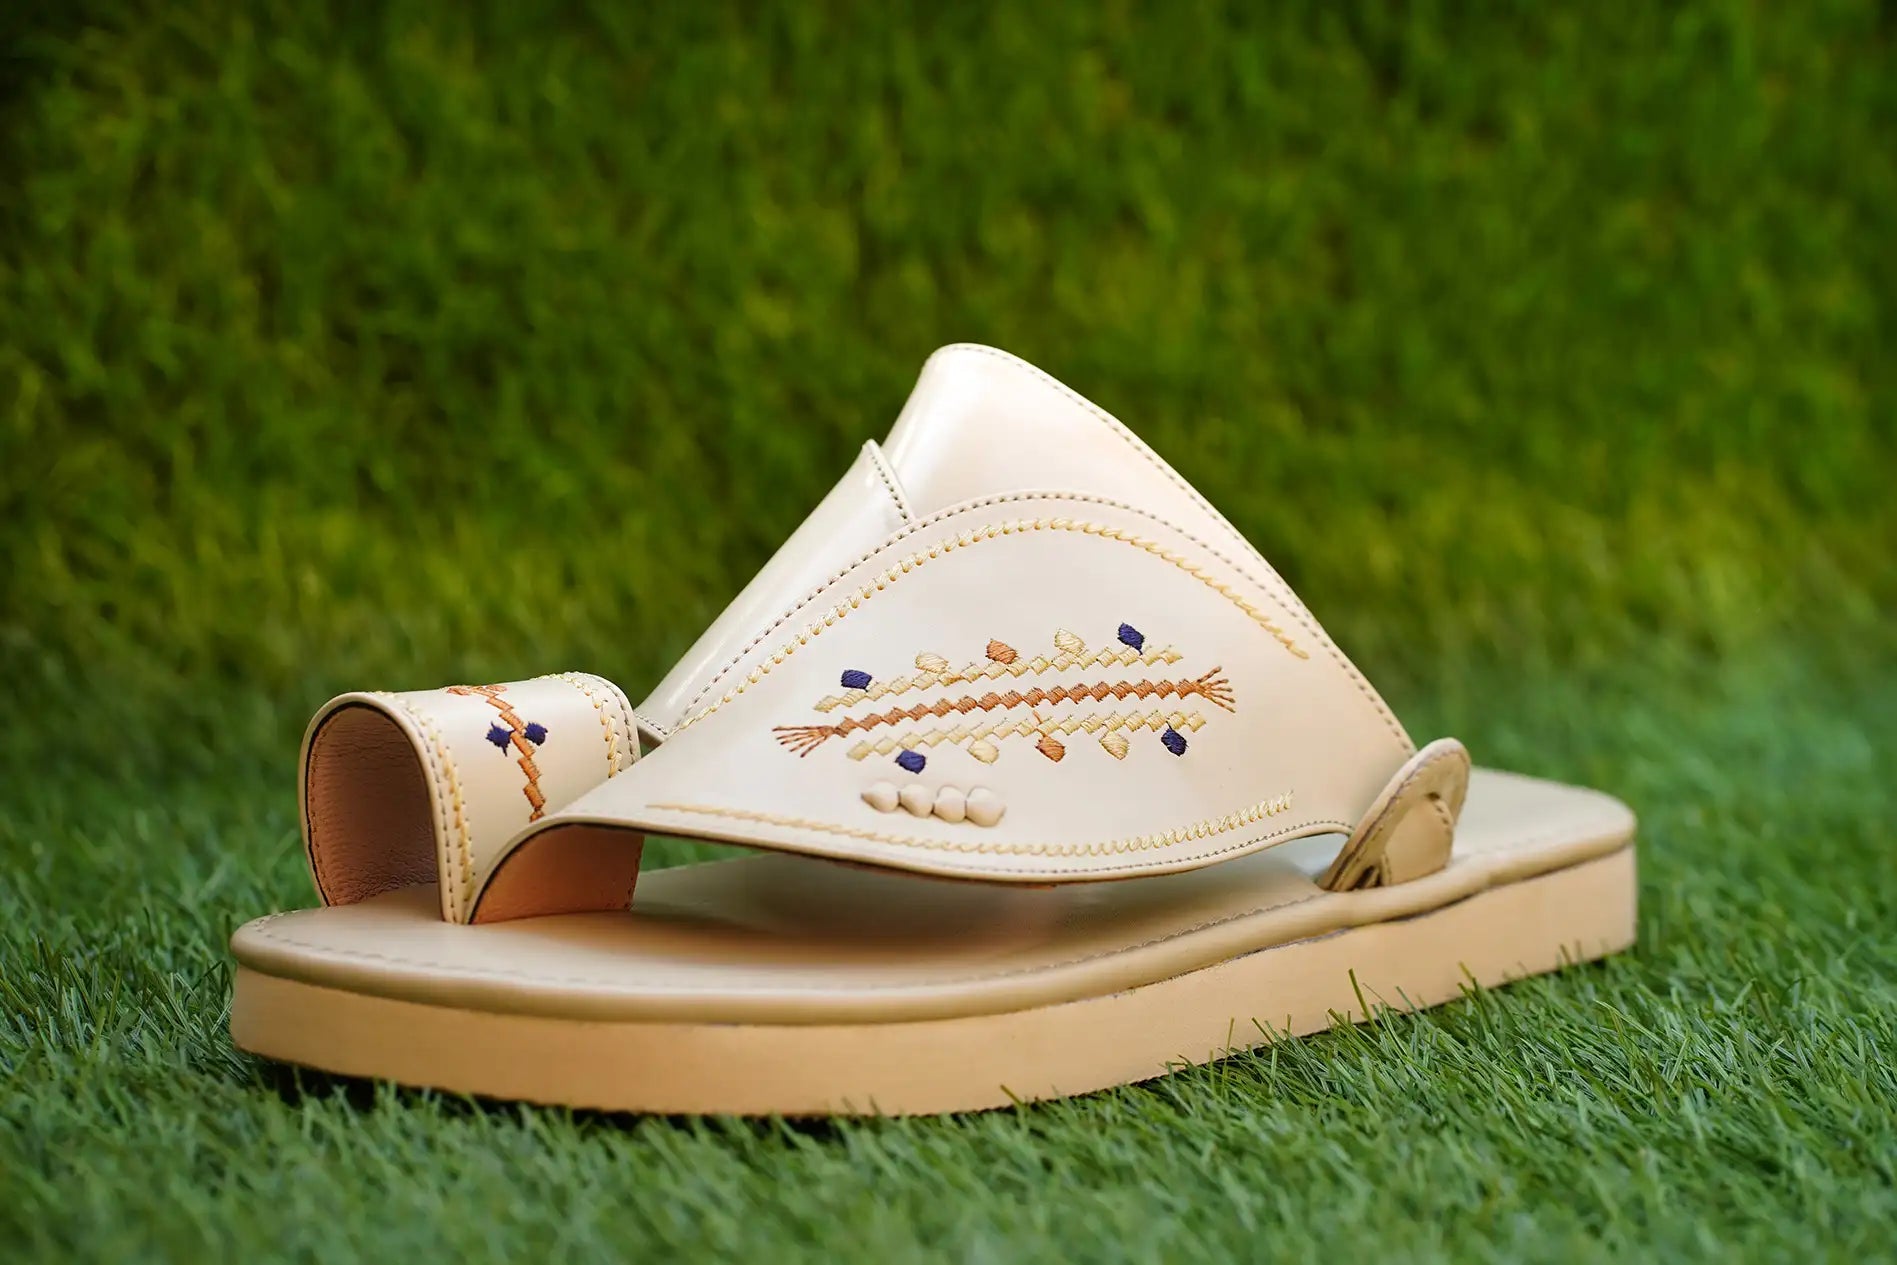 Arabic Khaliji Sandals in Cream Colour with iconic Embroidery